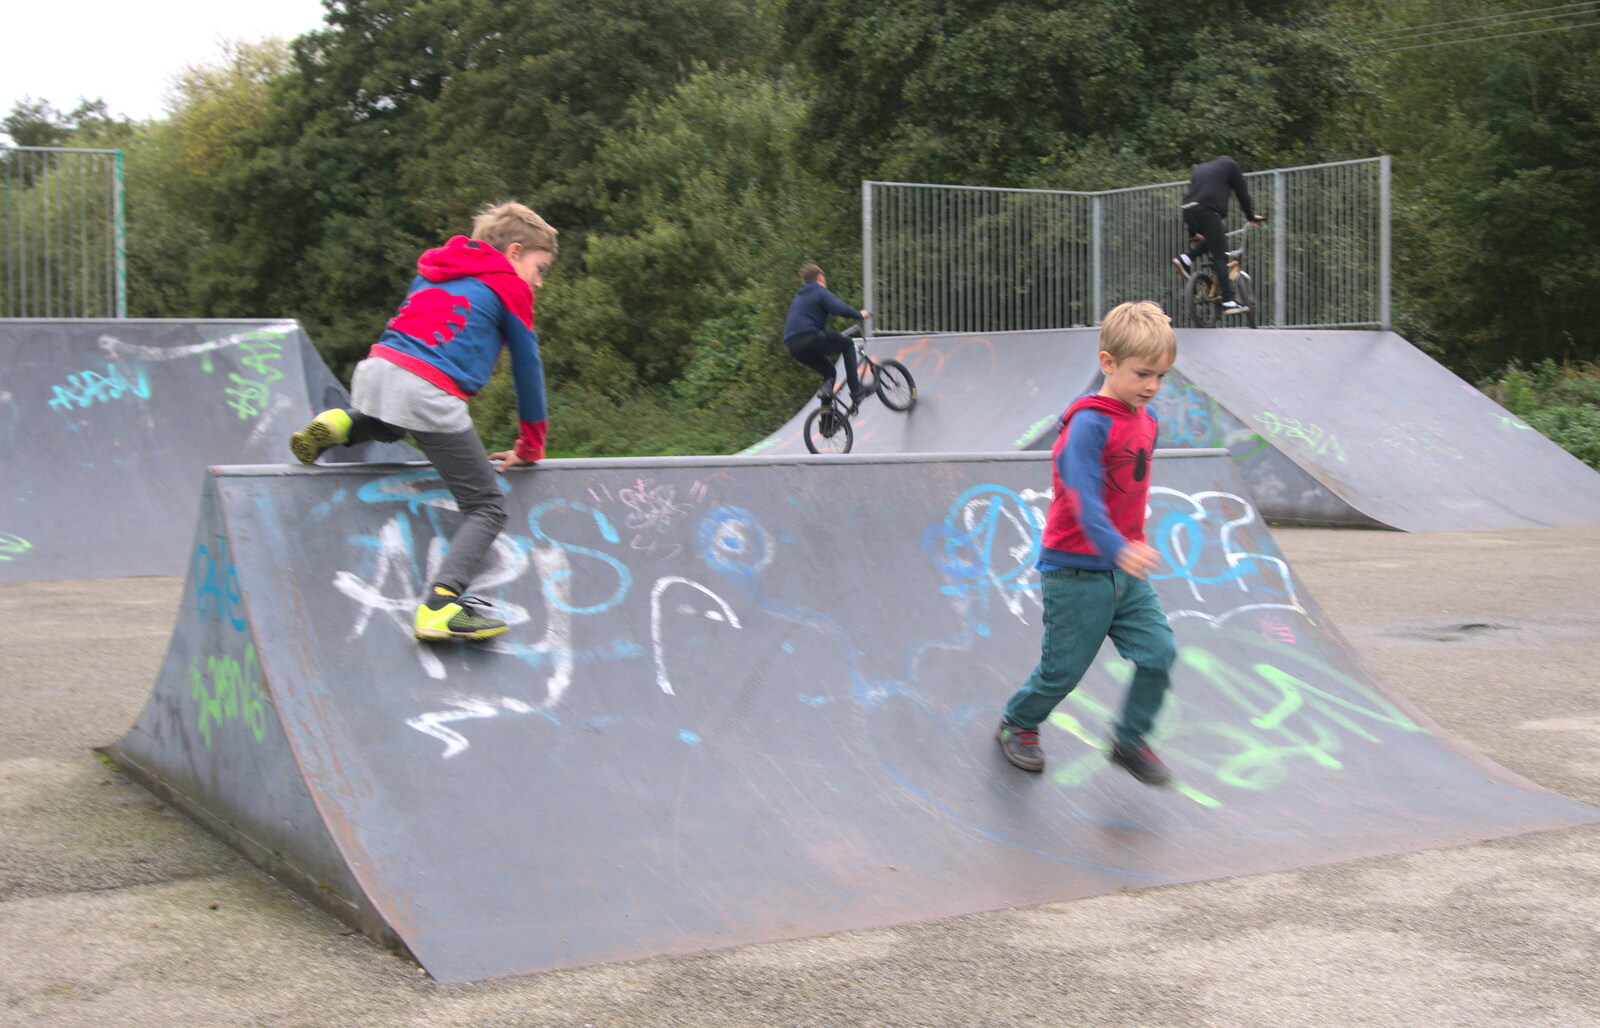 The boys run up and down ramps from Skate Parks and Orange Skies, Brome and Eye, Suffolk - 10th October 2017